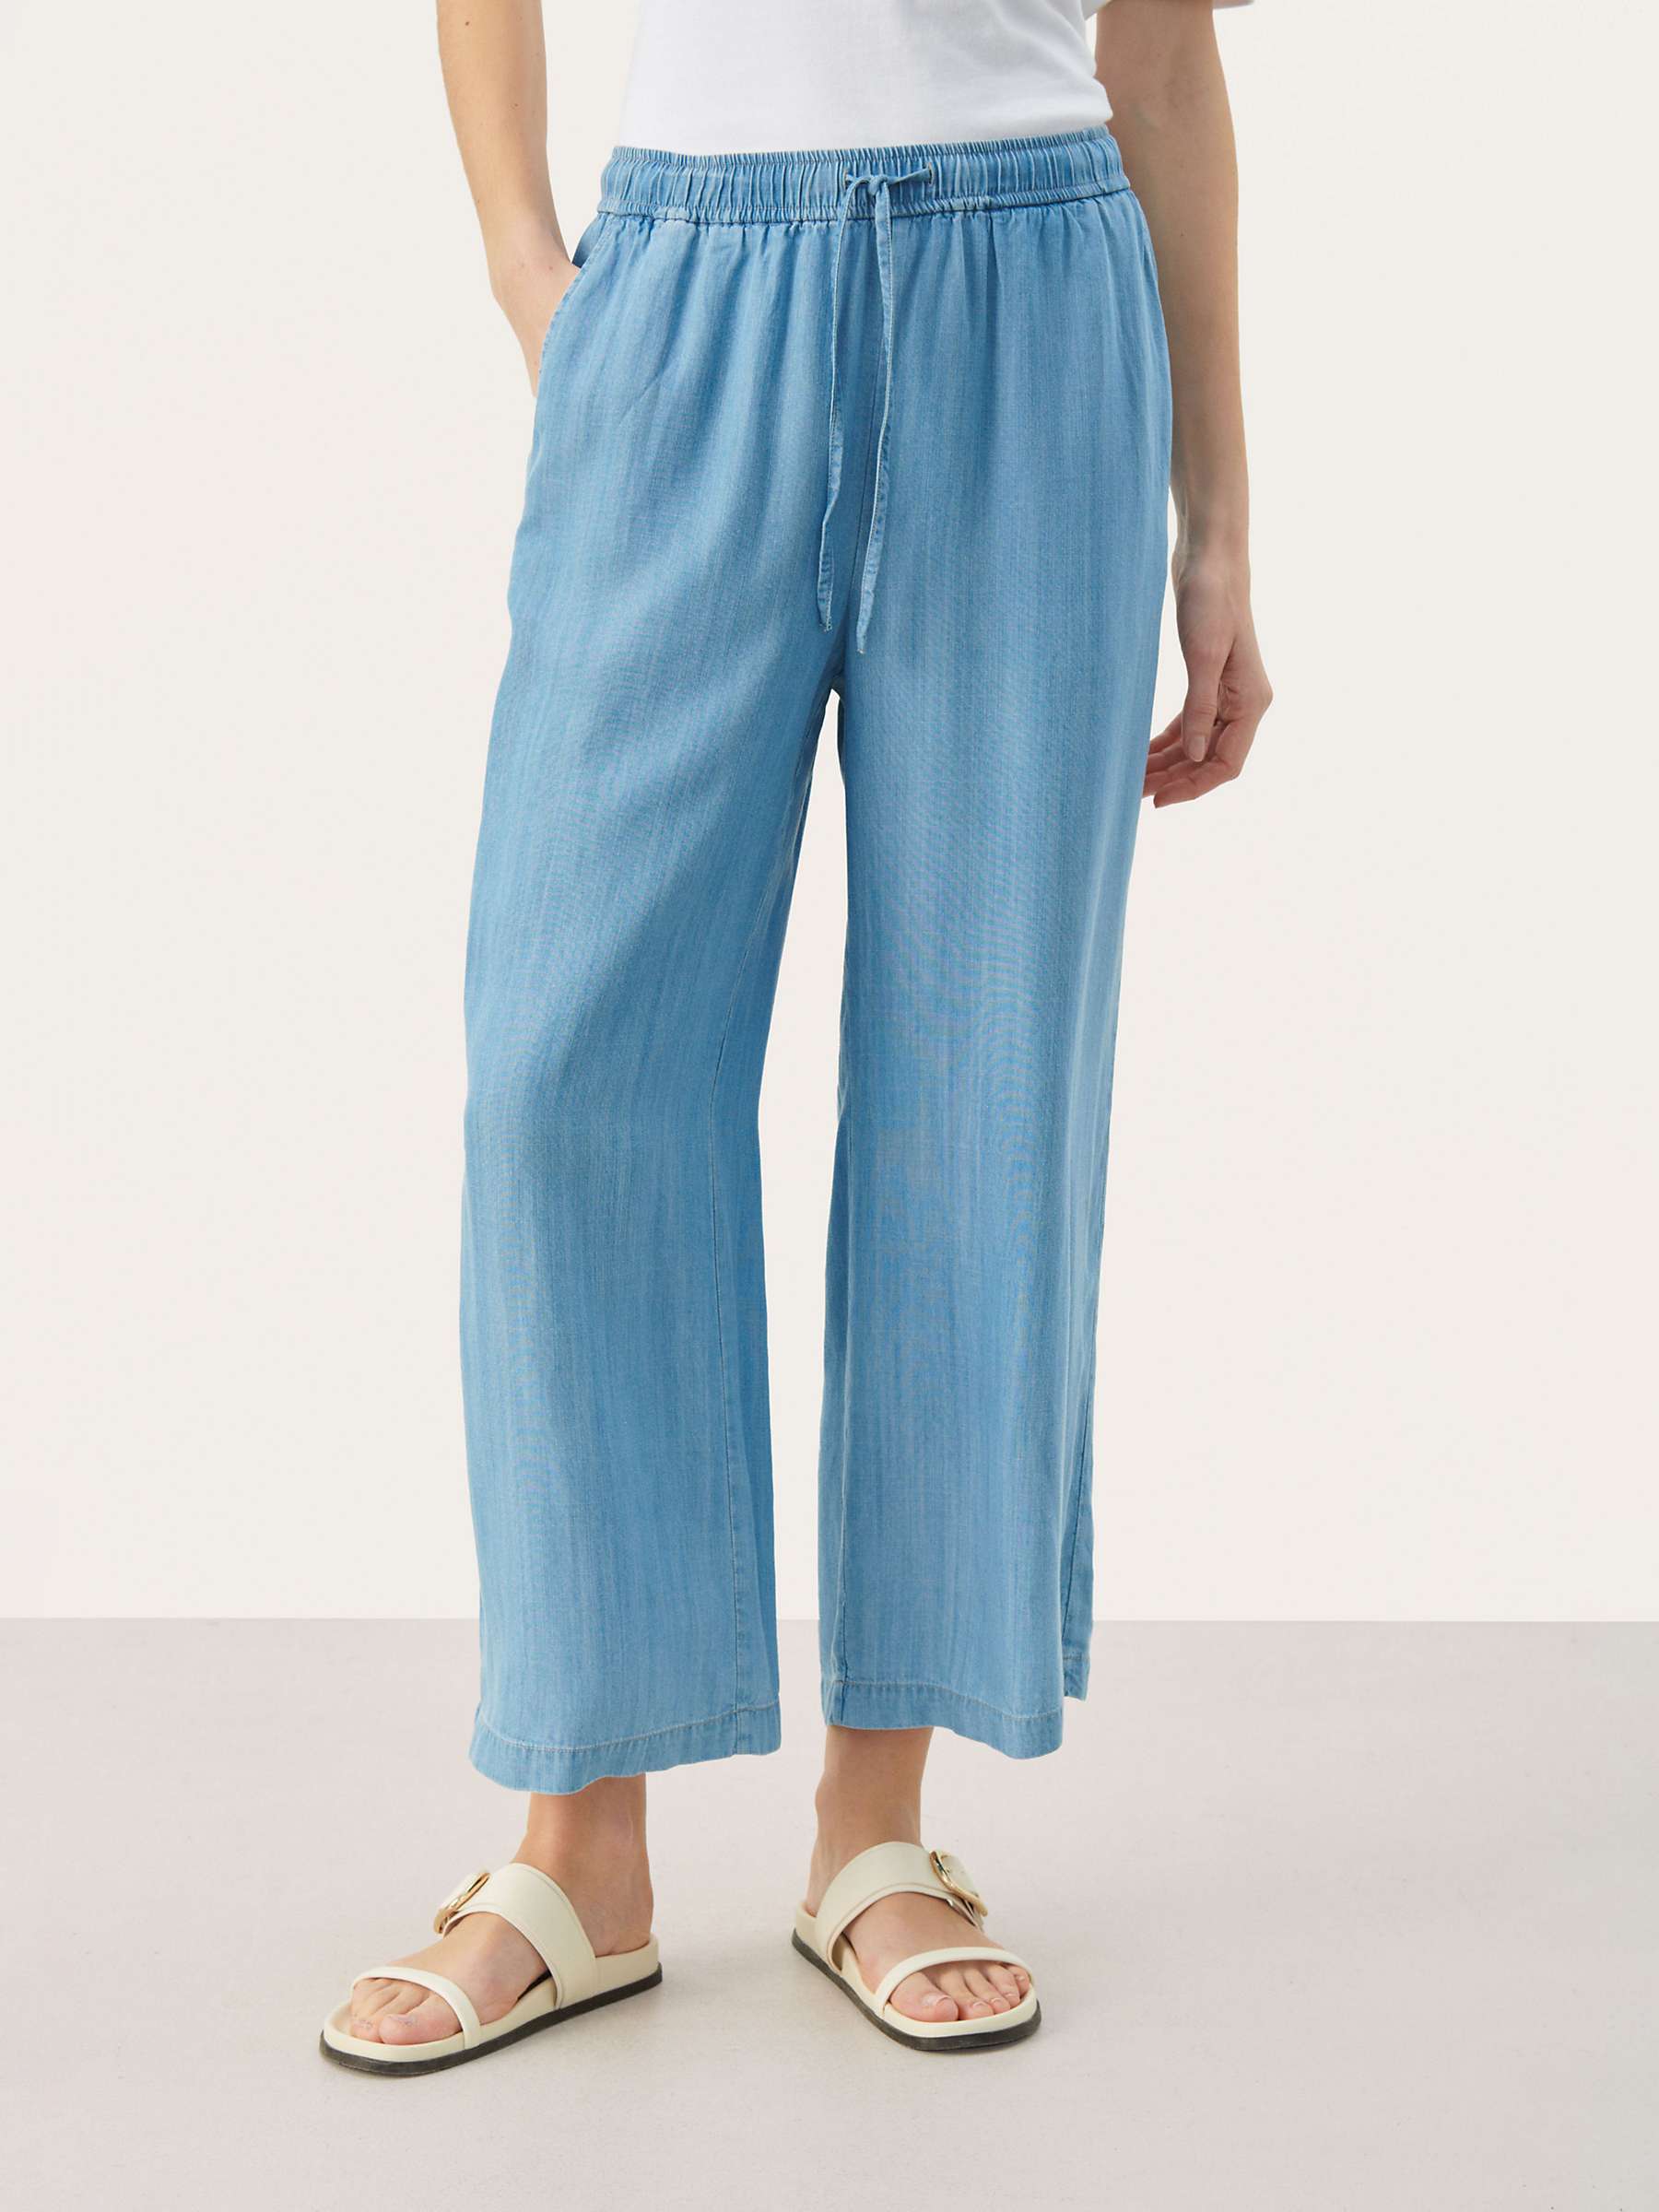 Buy Part Two Cibells Cropped Wide Leg Trousers, Medium Blue Online at johnlewis.com